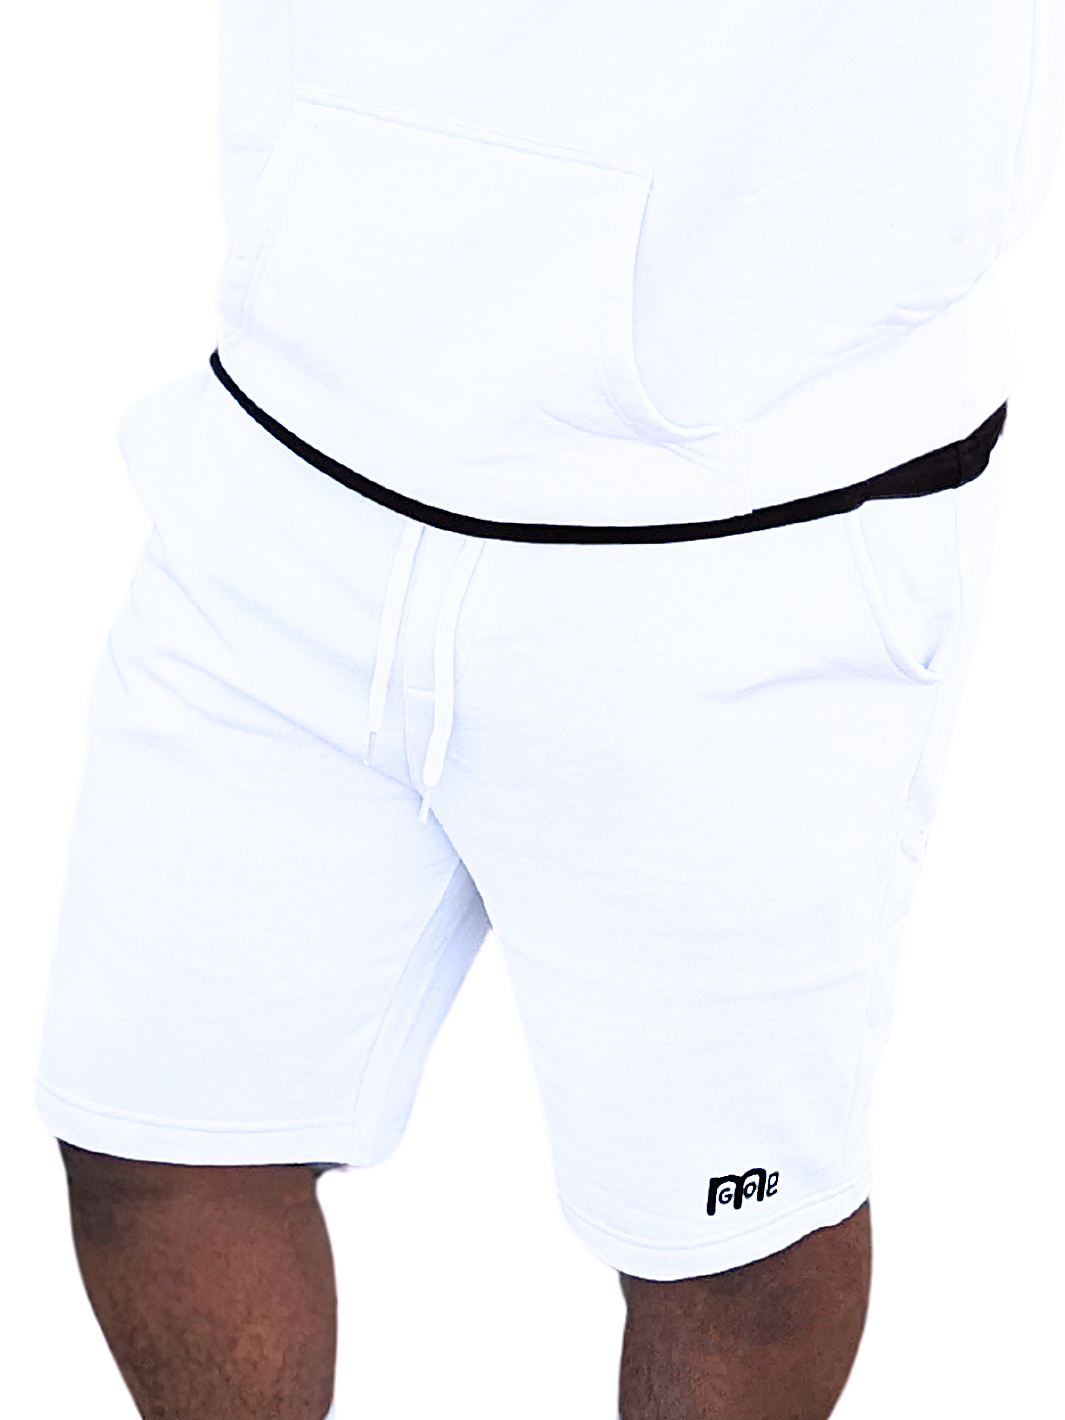 Perfect for any occasion, these White GODinme shorts provide an actively casual fit, jersey lined side and back pockets, elastic waistband, sewn eyelets, and fly details: providing the ultimate pair of shorts for any man of faith. But the Black GODinme logo at left leg is the tell all, combining faith with fashion.